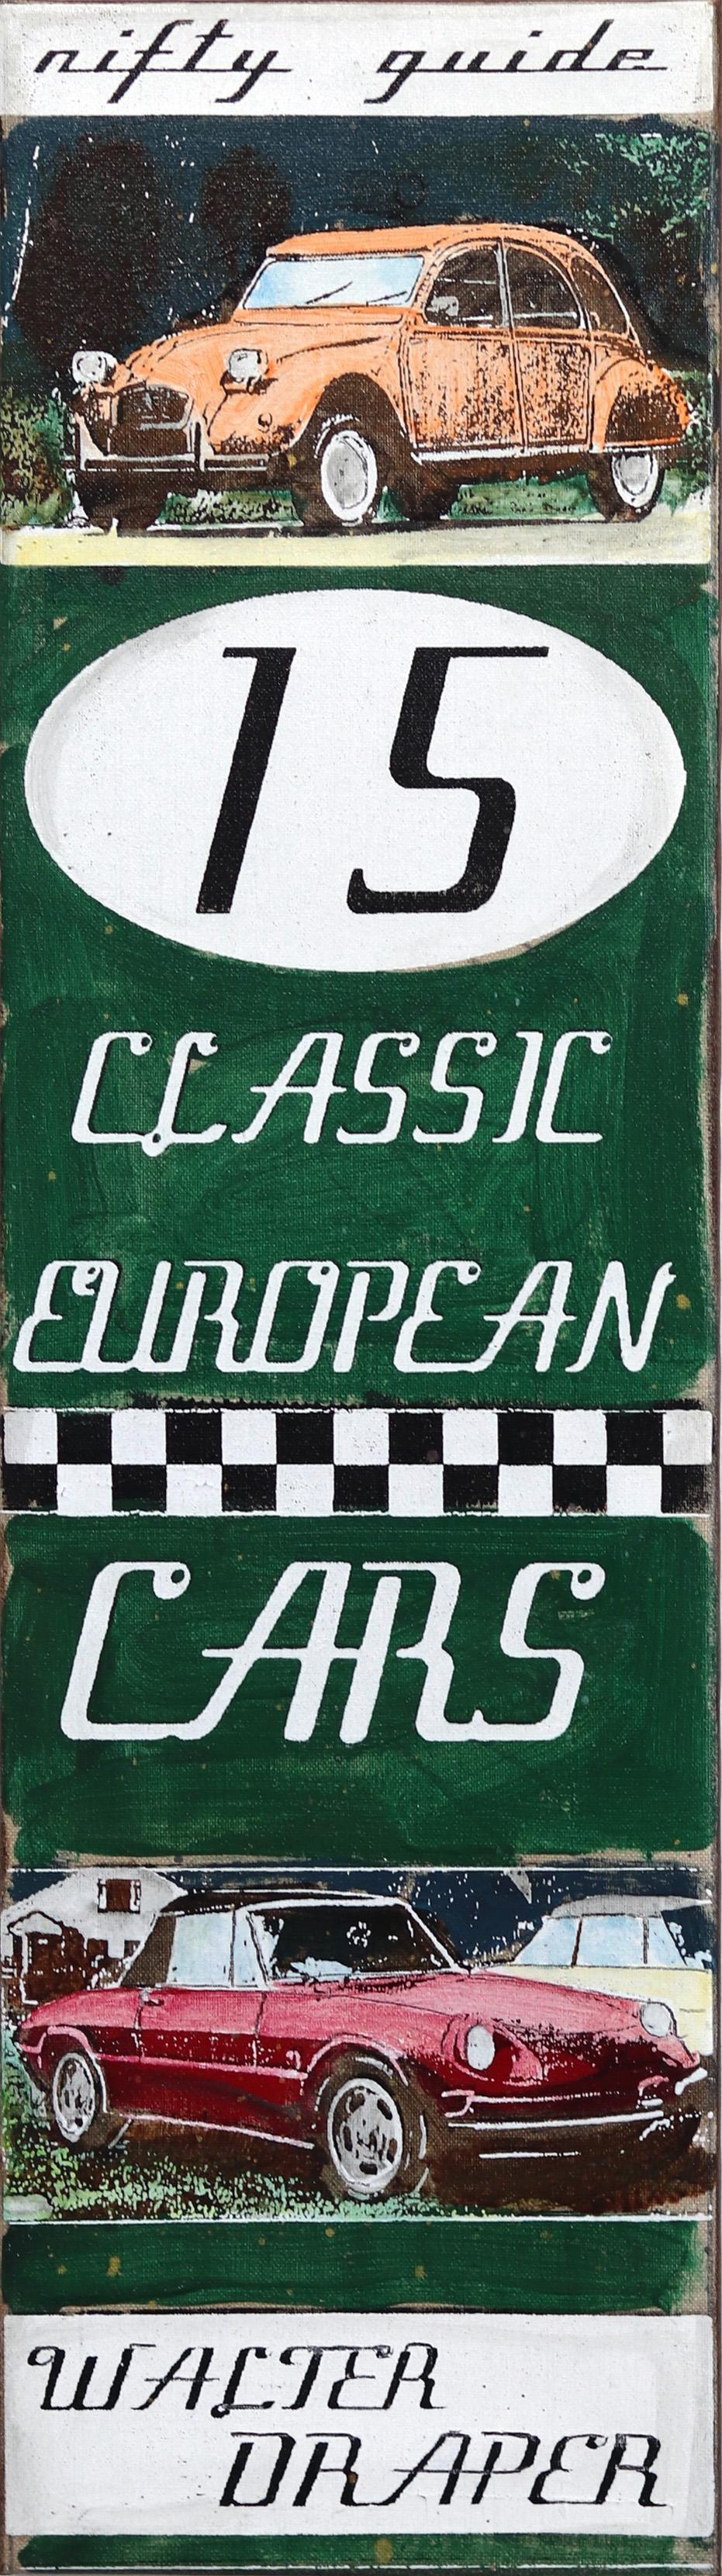 Classic European Cars - Original Colorful Book Art Painting on Canvas 